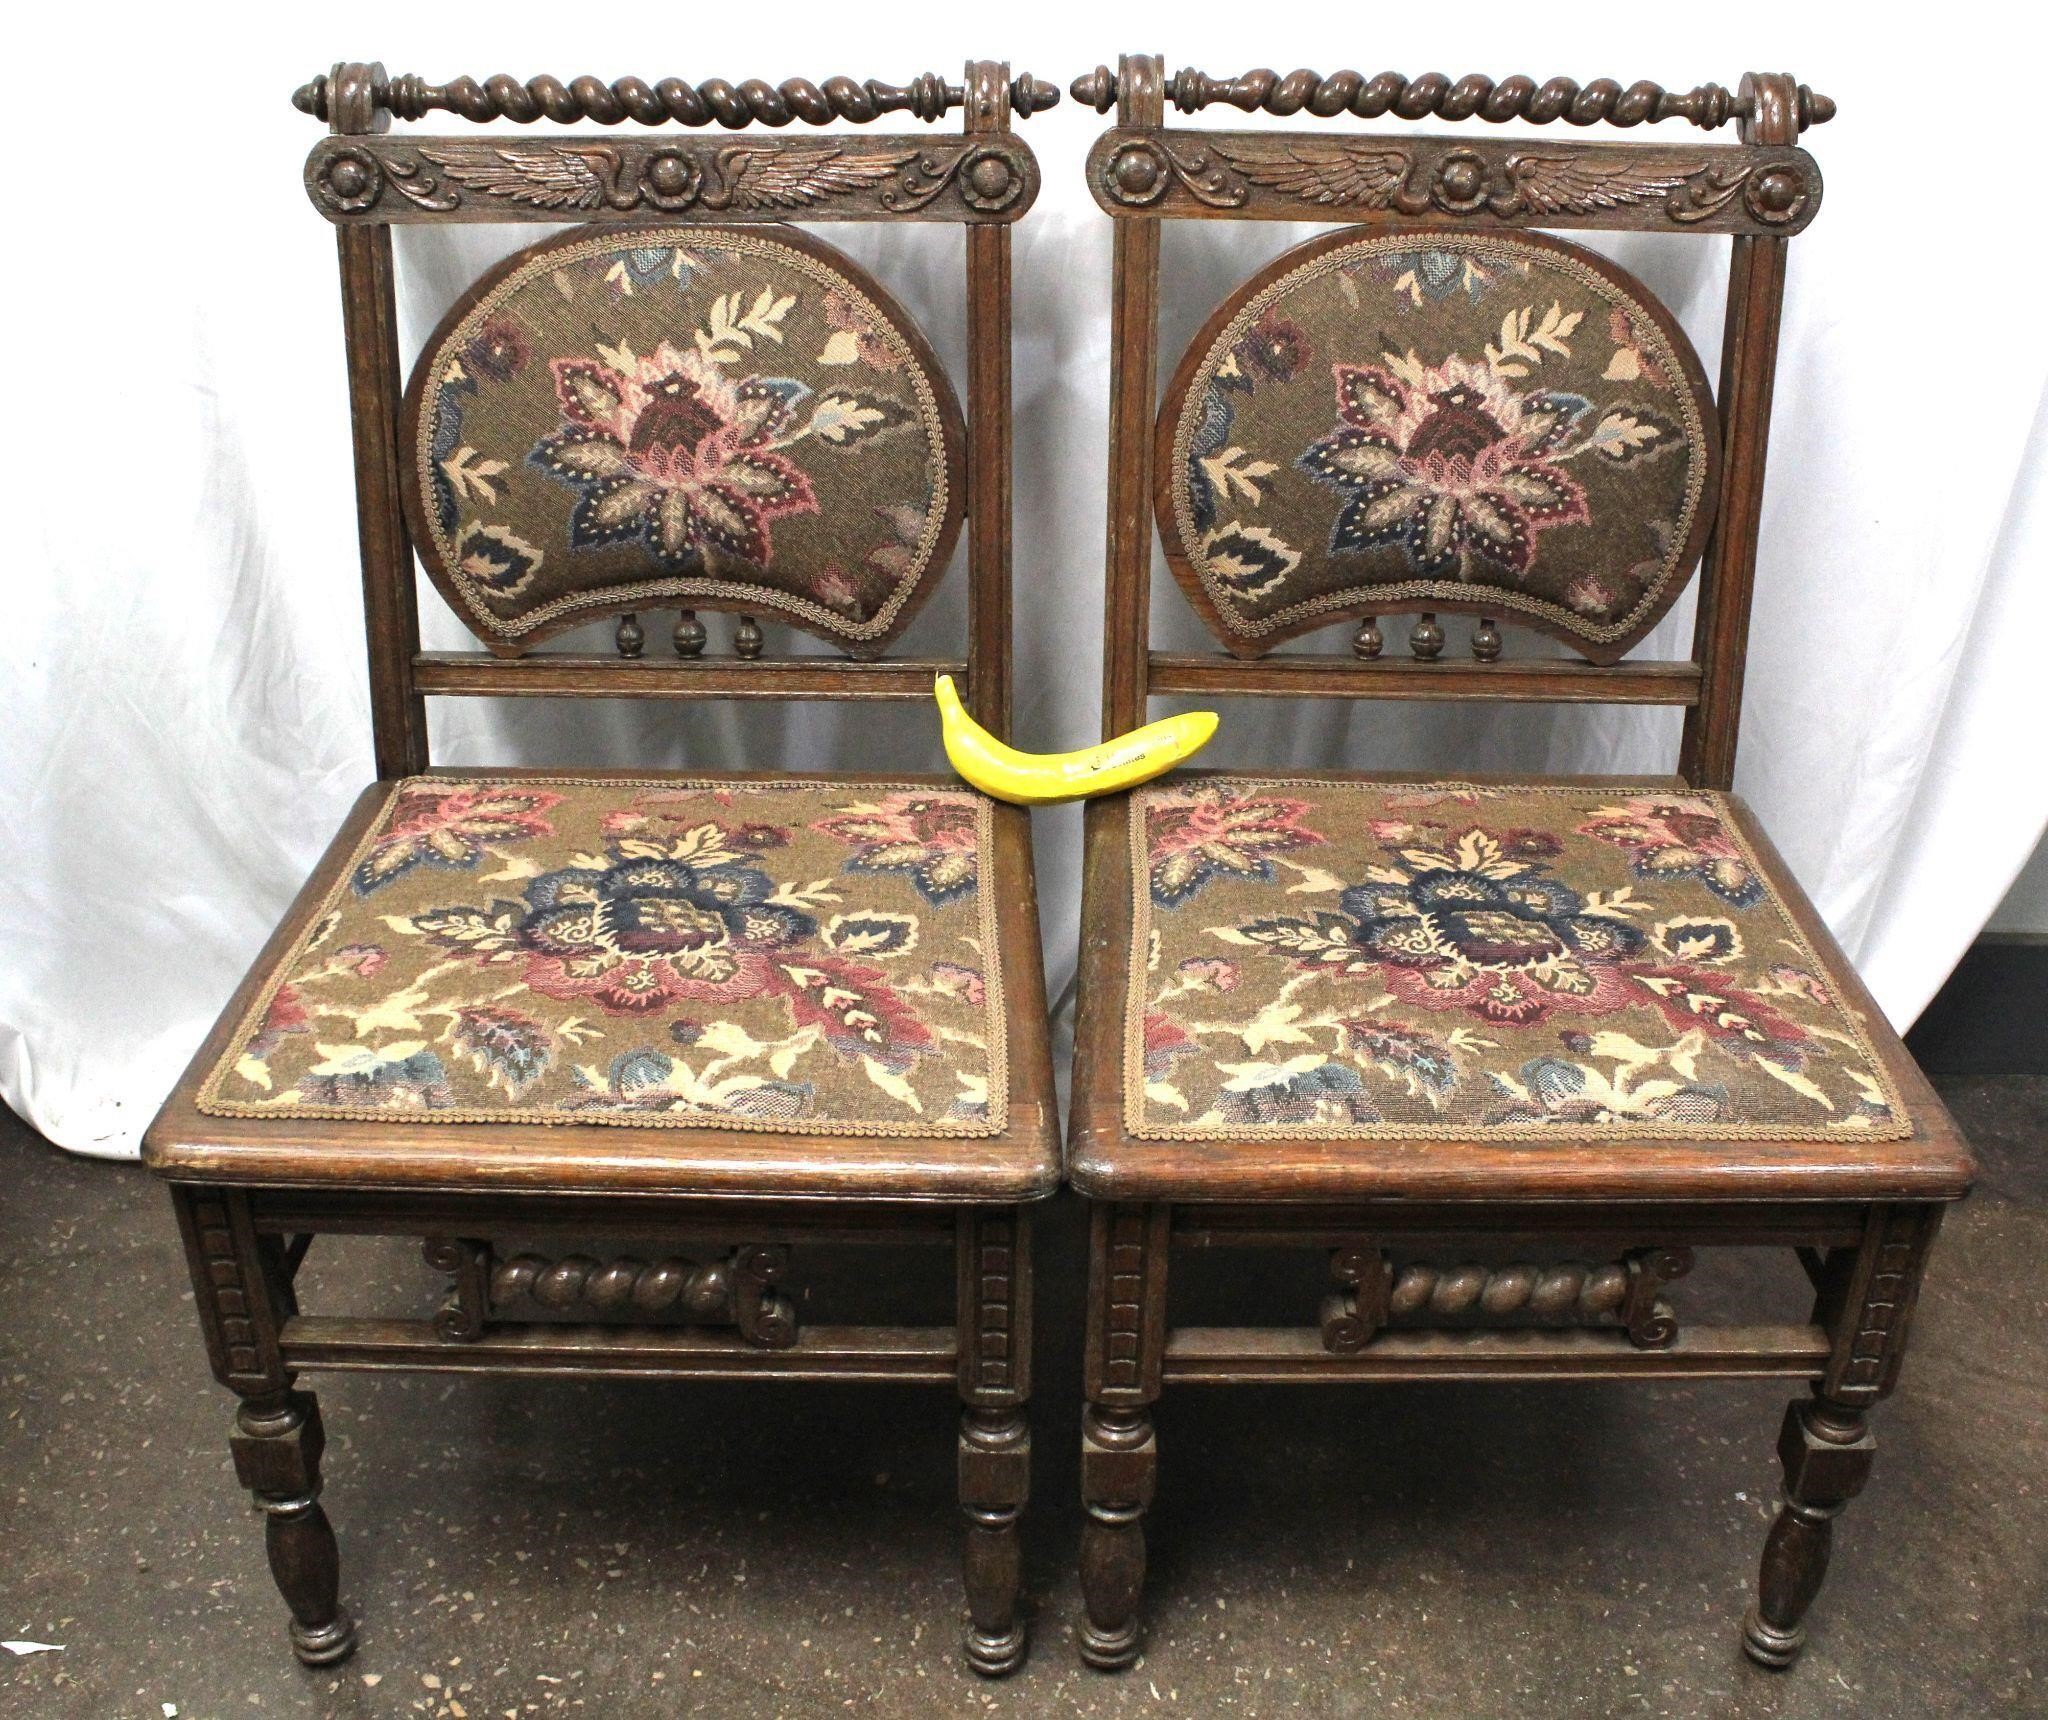 Victorian Carved Wood Chairs